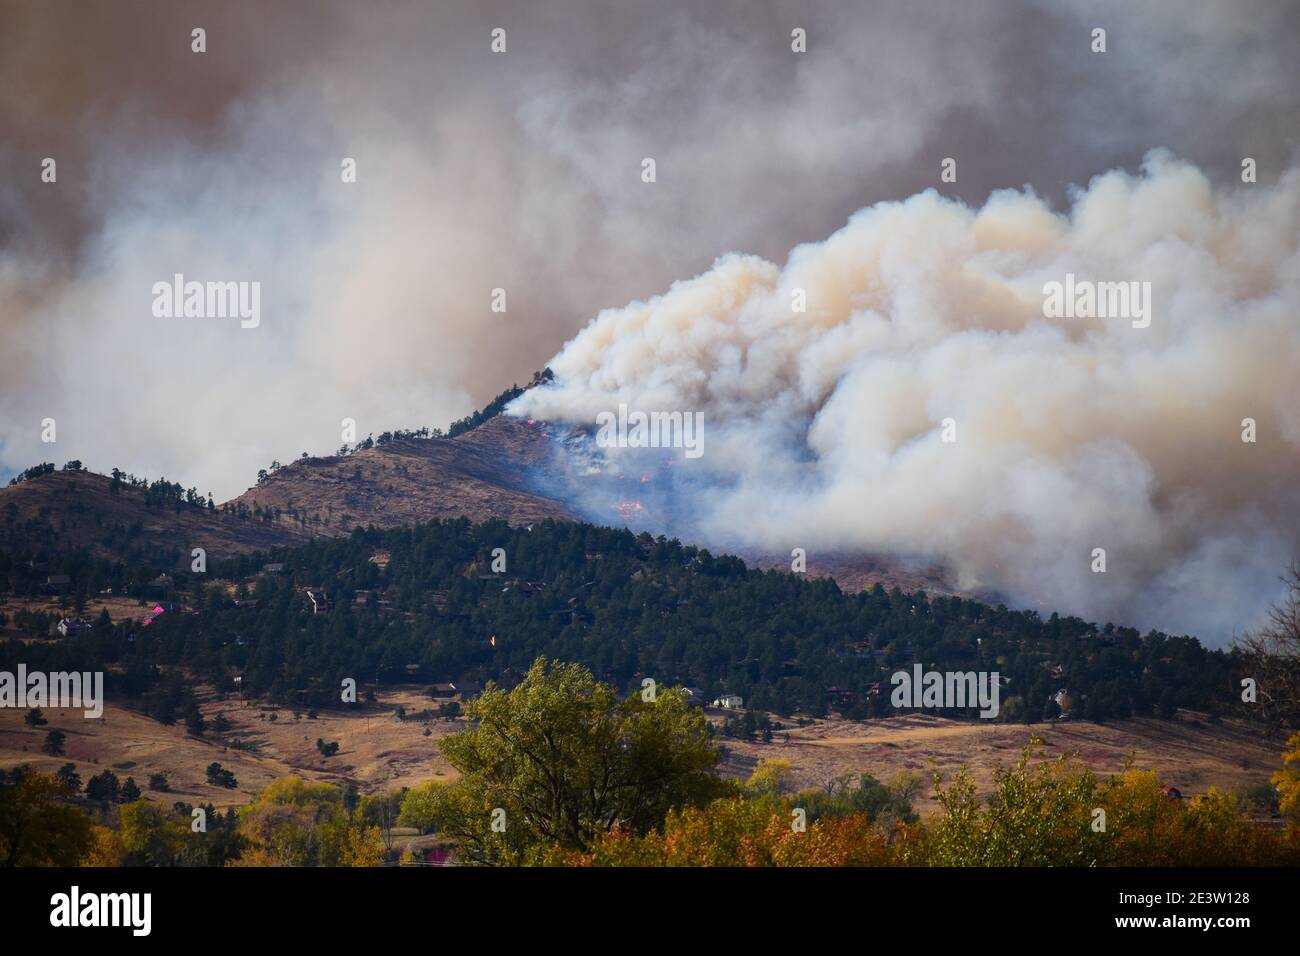 From the Colorado fires in 2020. Stock Photo